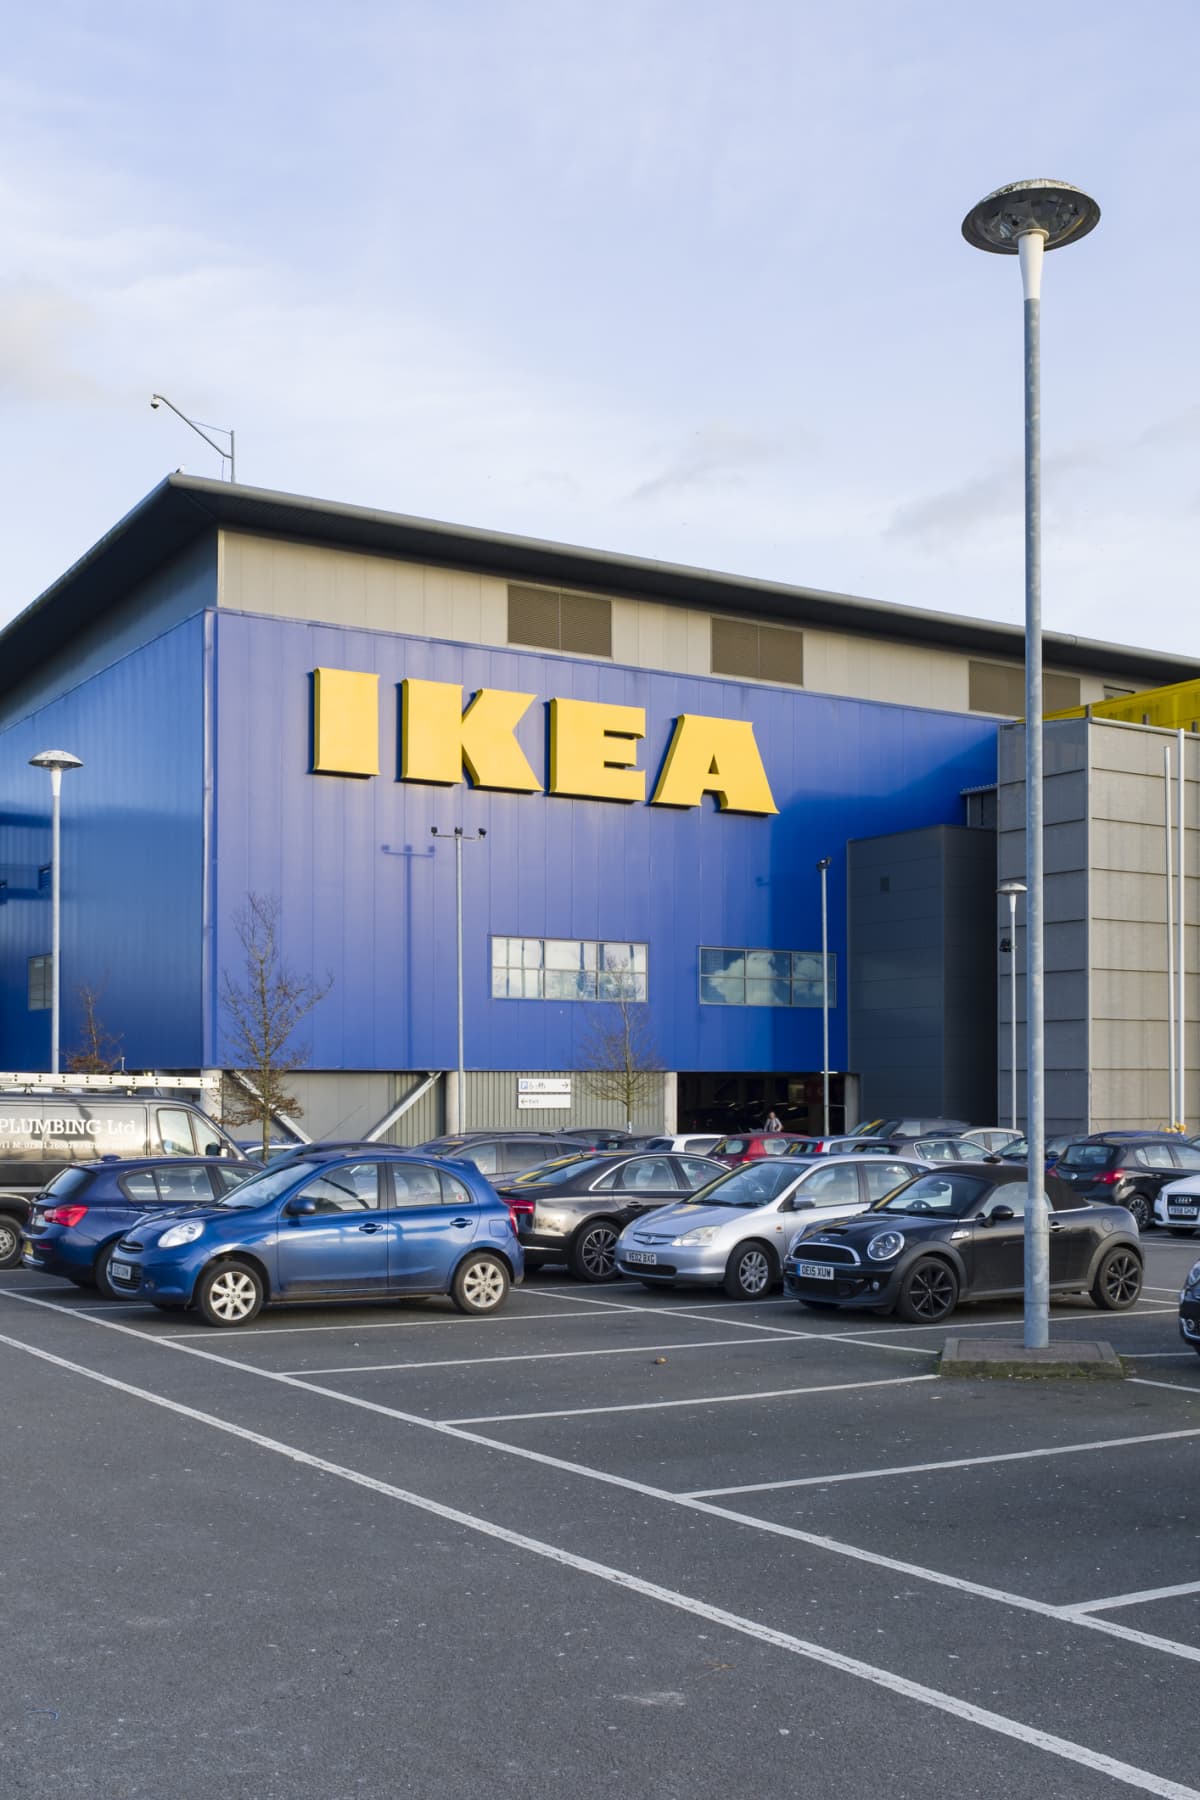 Exterior and sign of an IKEA furniture store